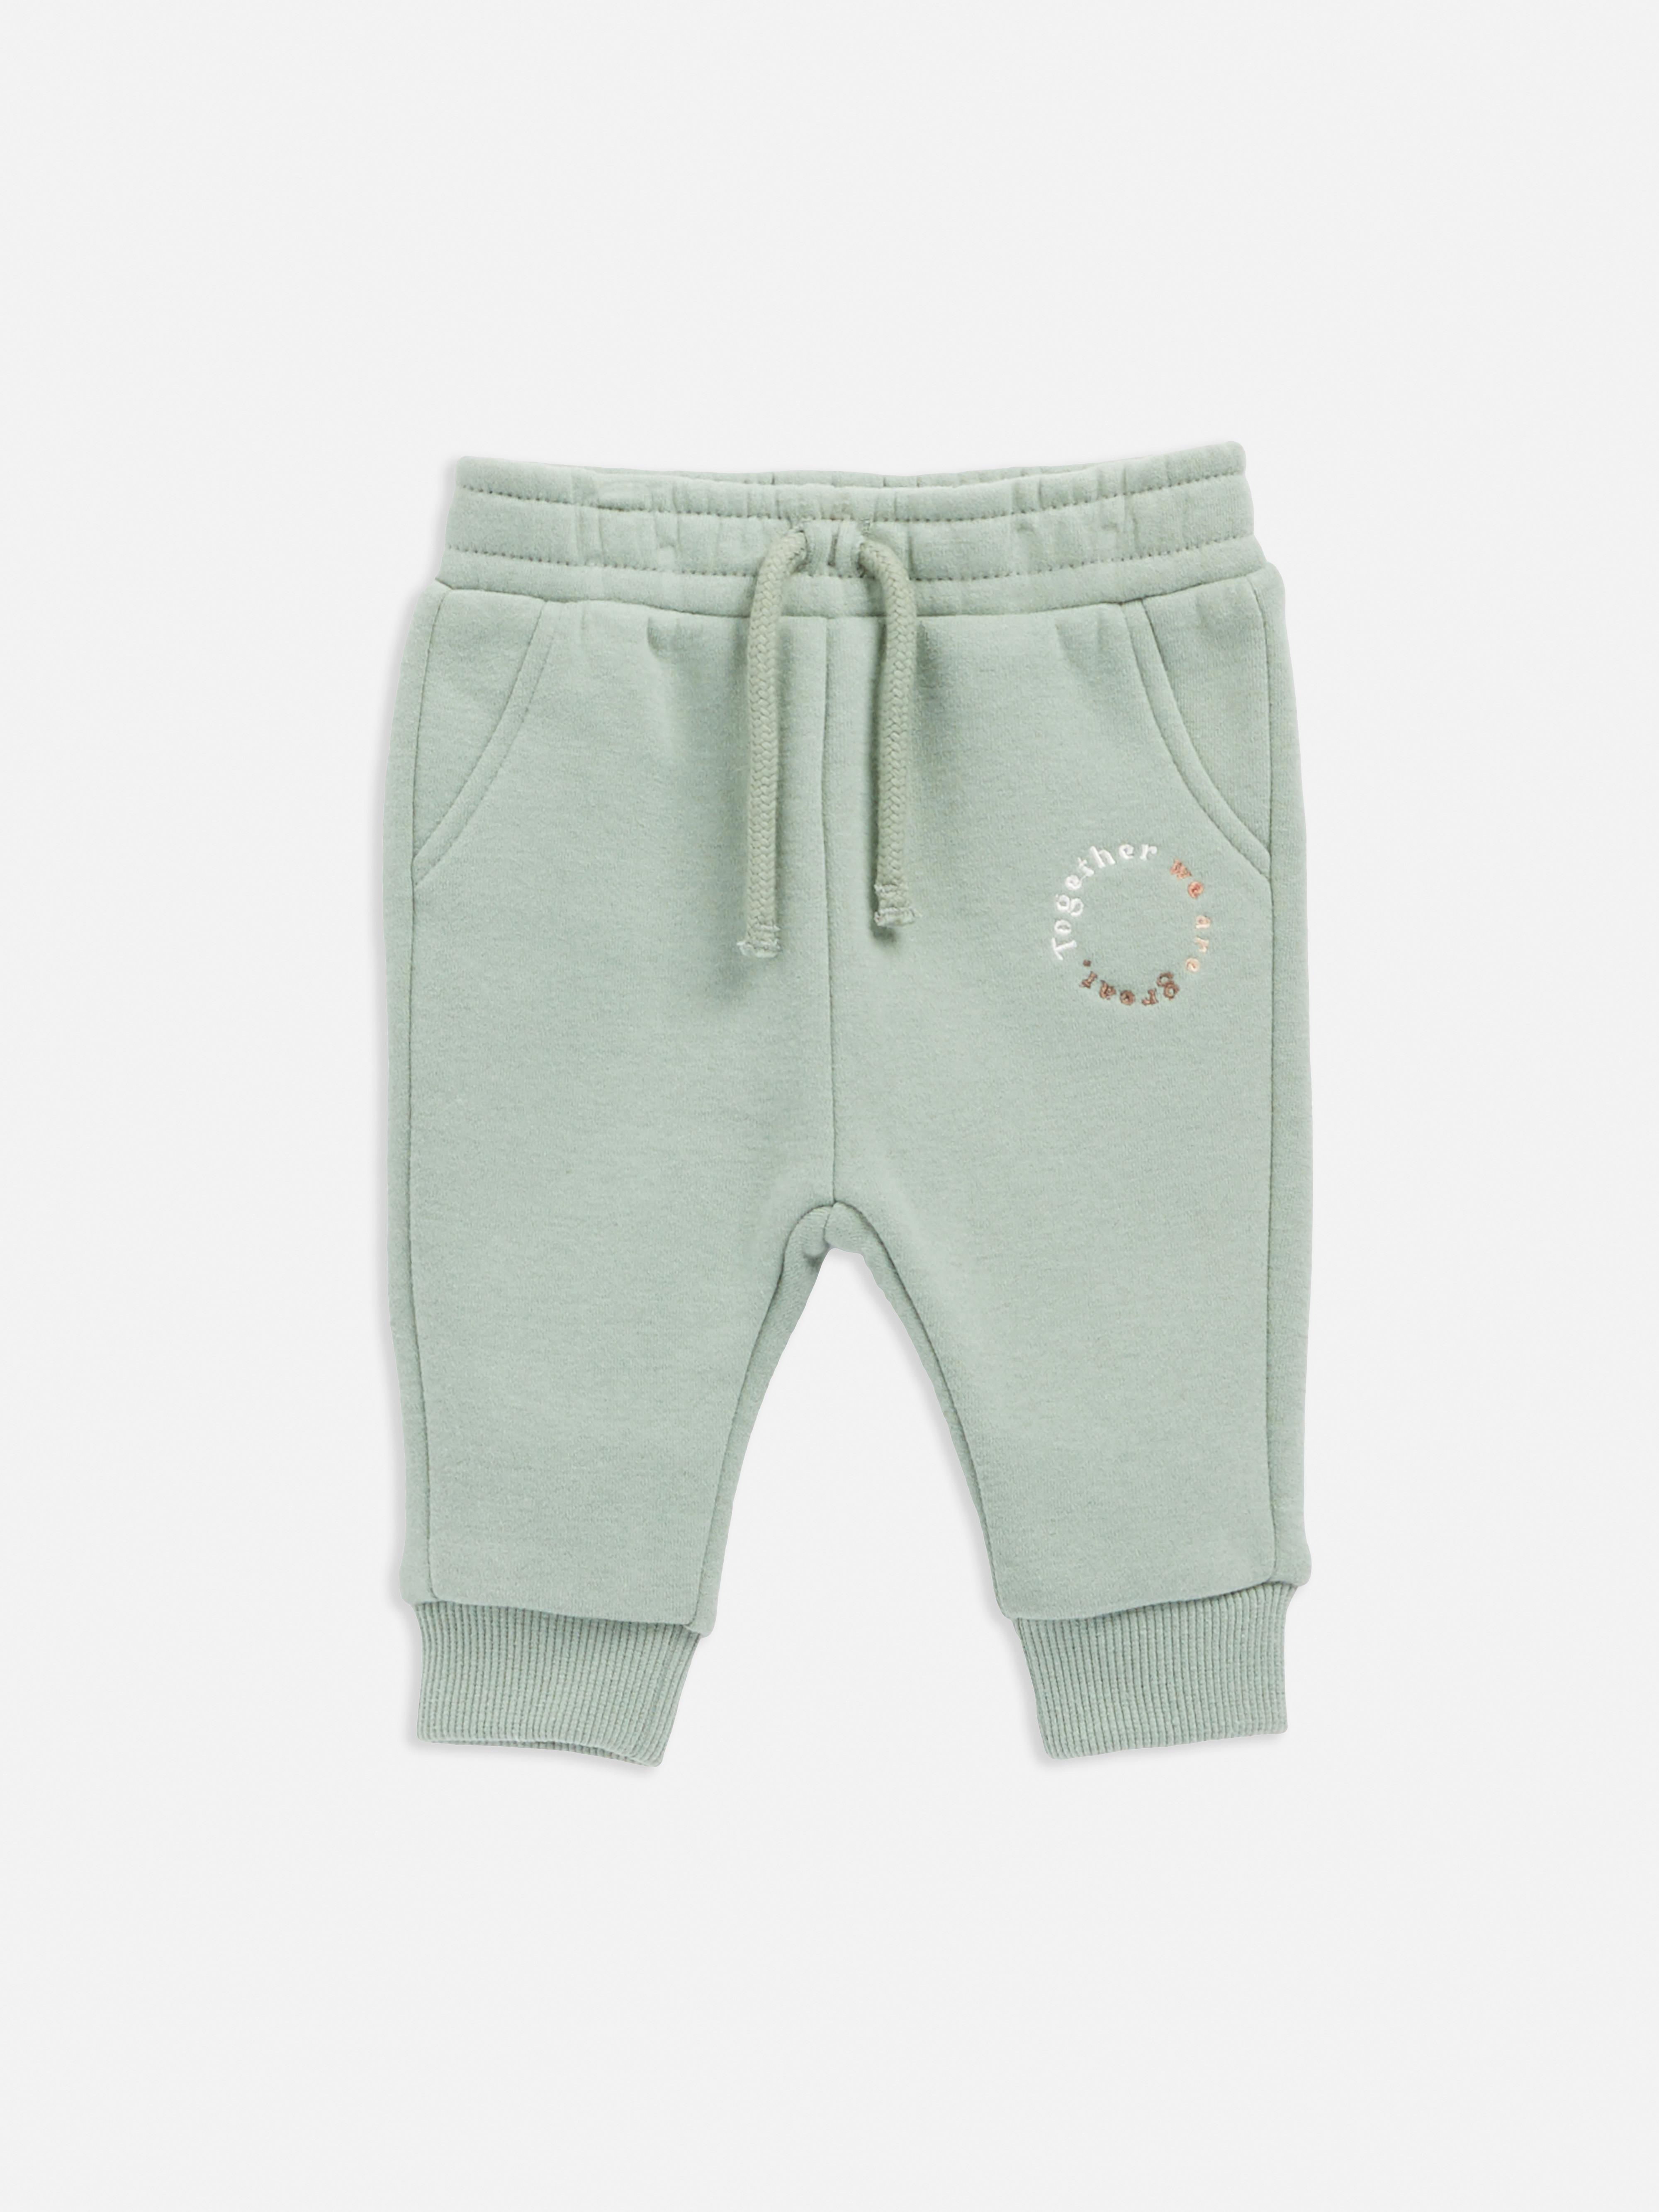 Stacey Solomon Drawstring Joggers Green